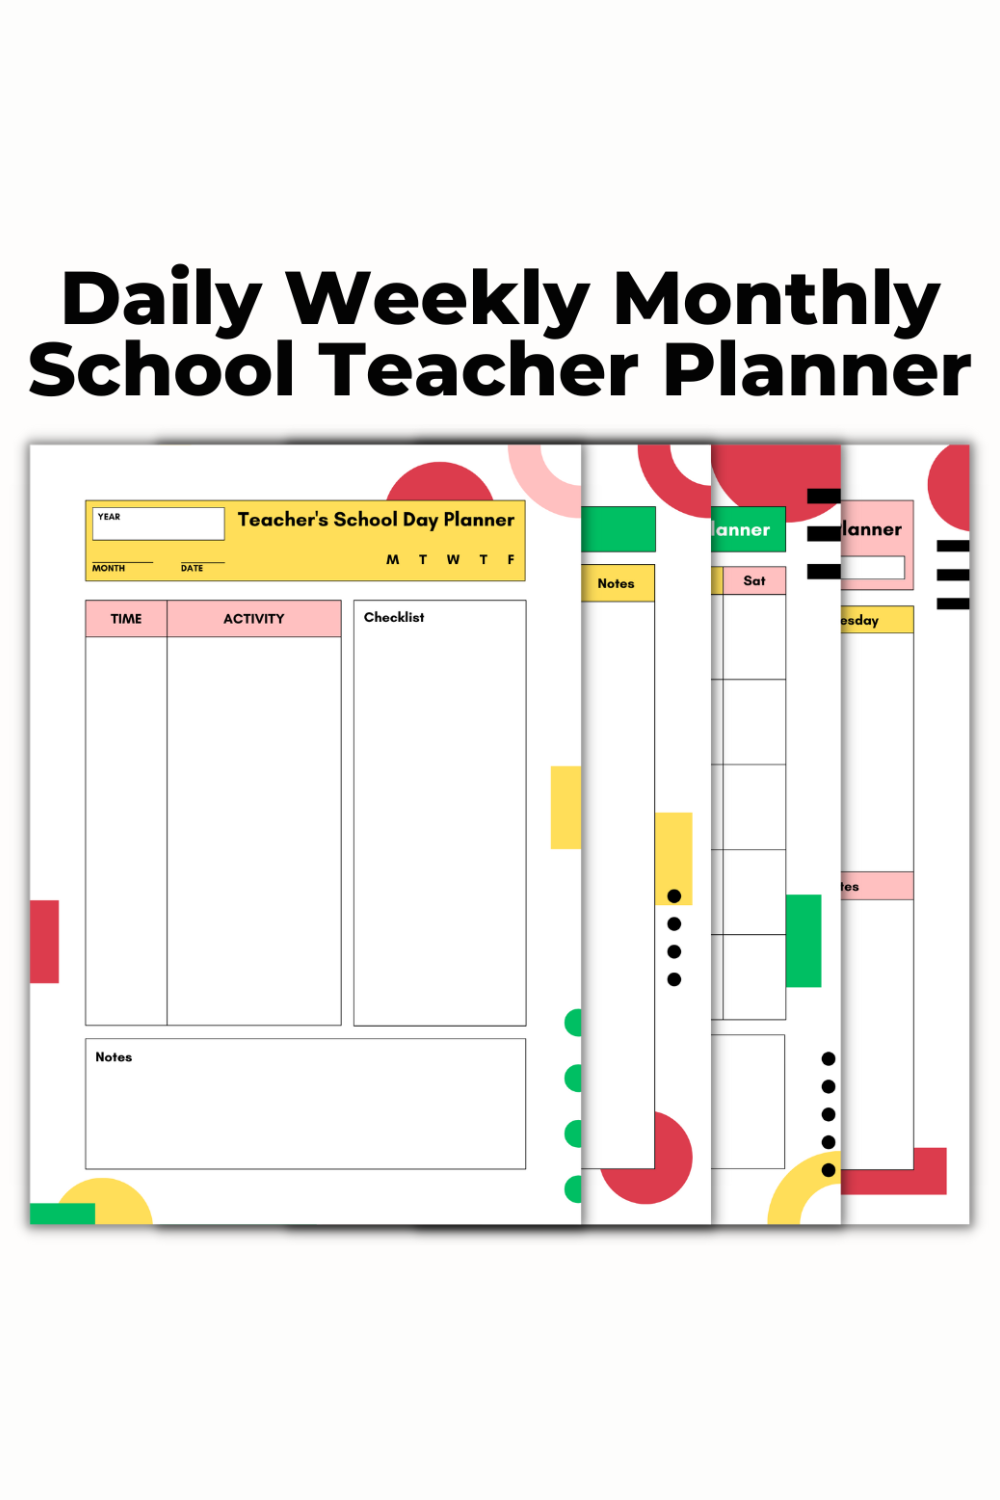 Daily Weekly Monthly School Teacher Planner Template pinterest preview image.